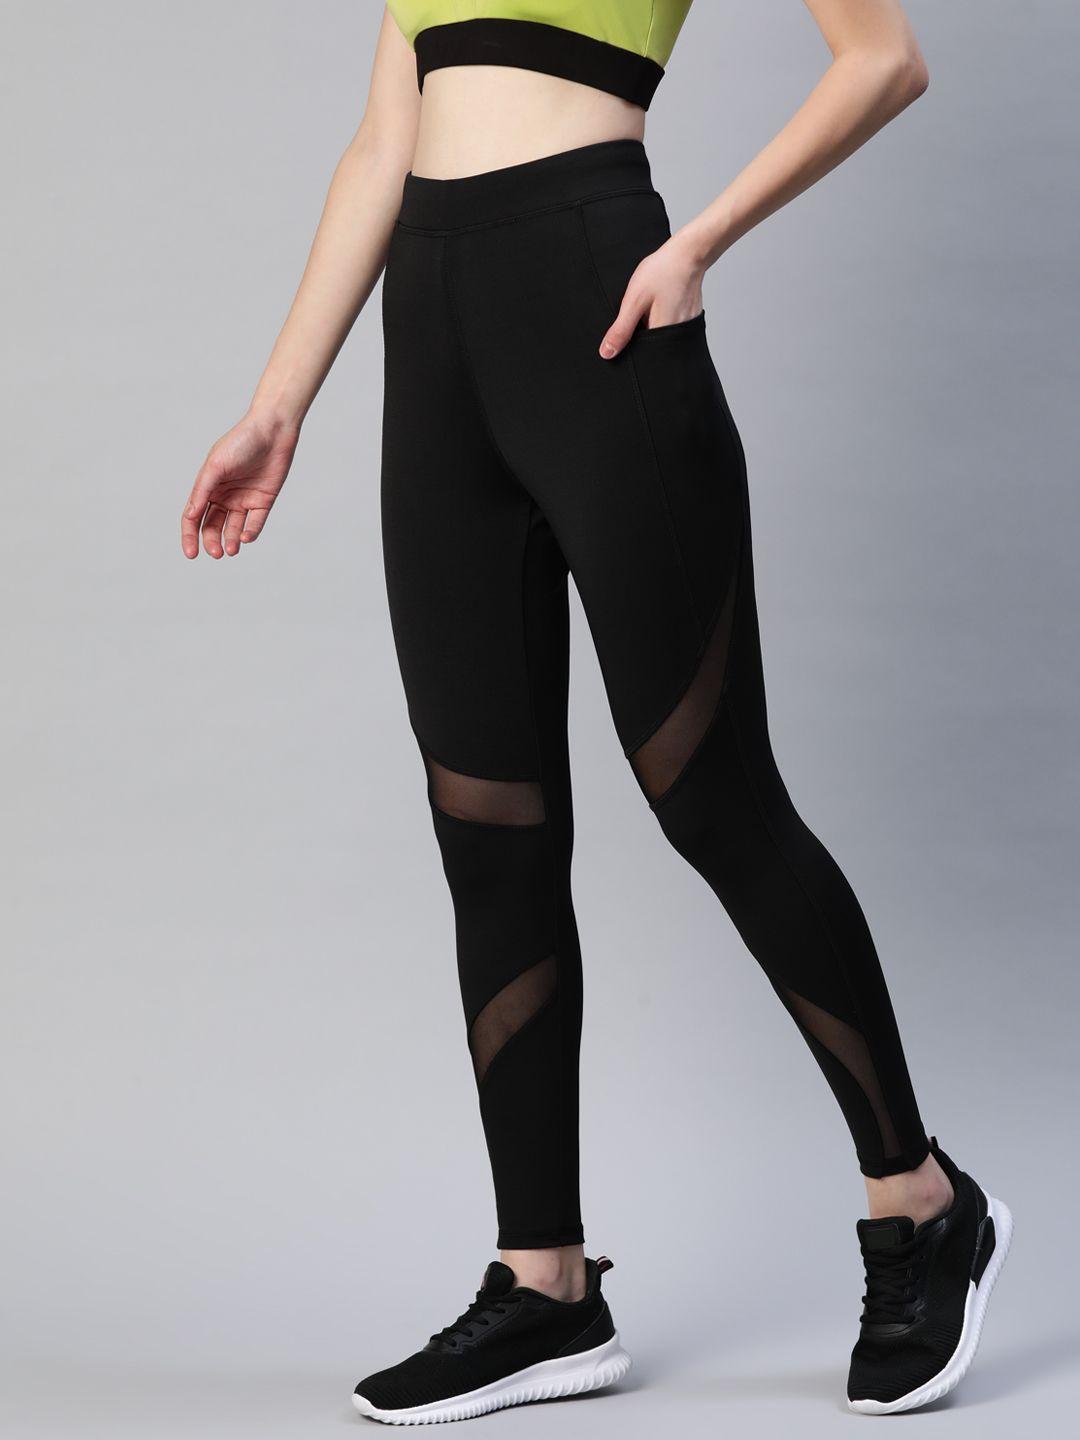 blinkin women black rapid dry tights with breathable mesh panels & side pockets